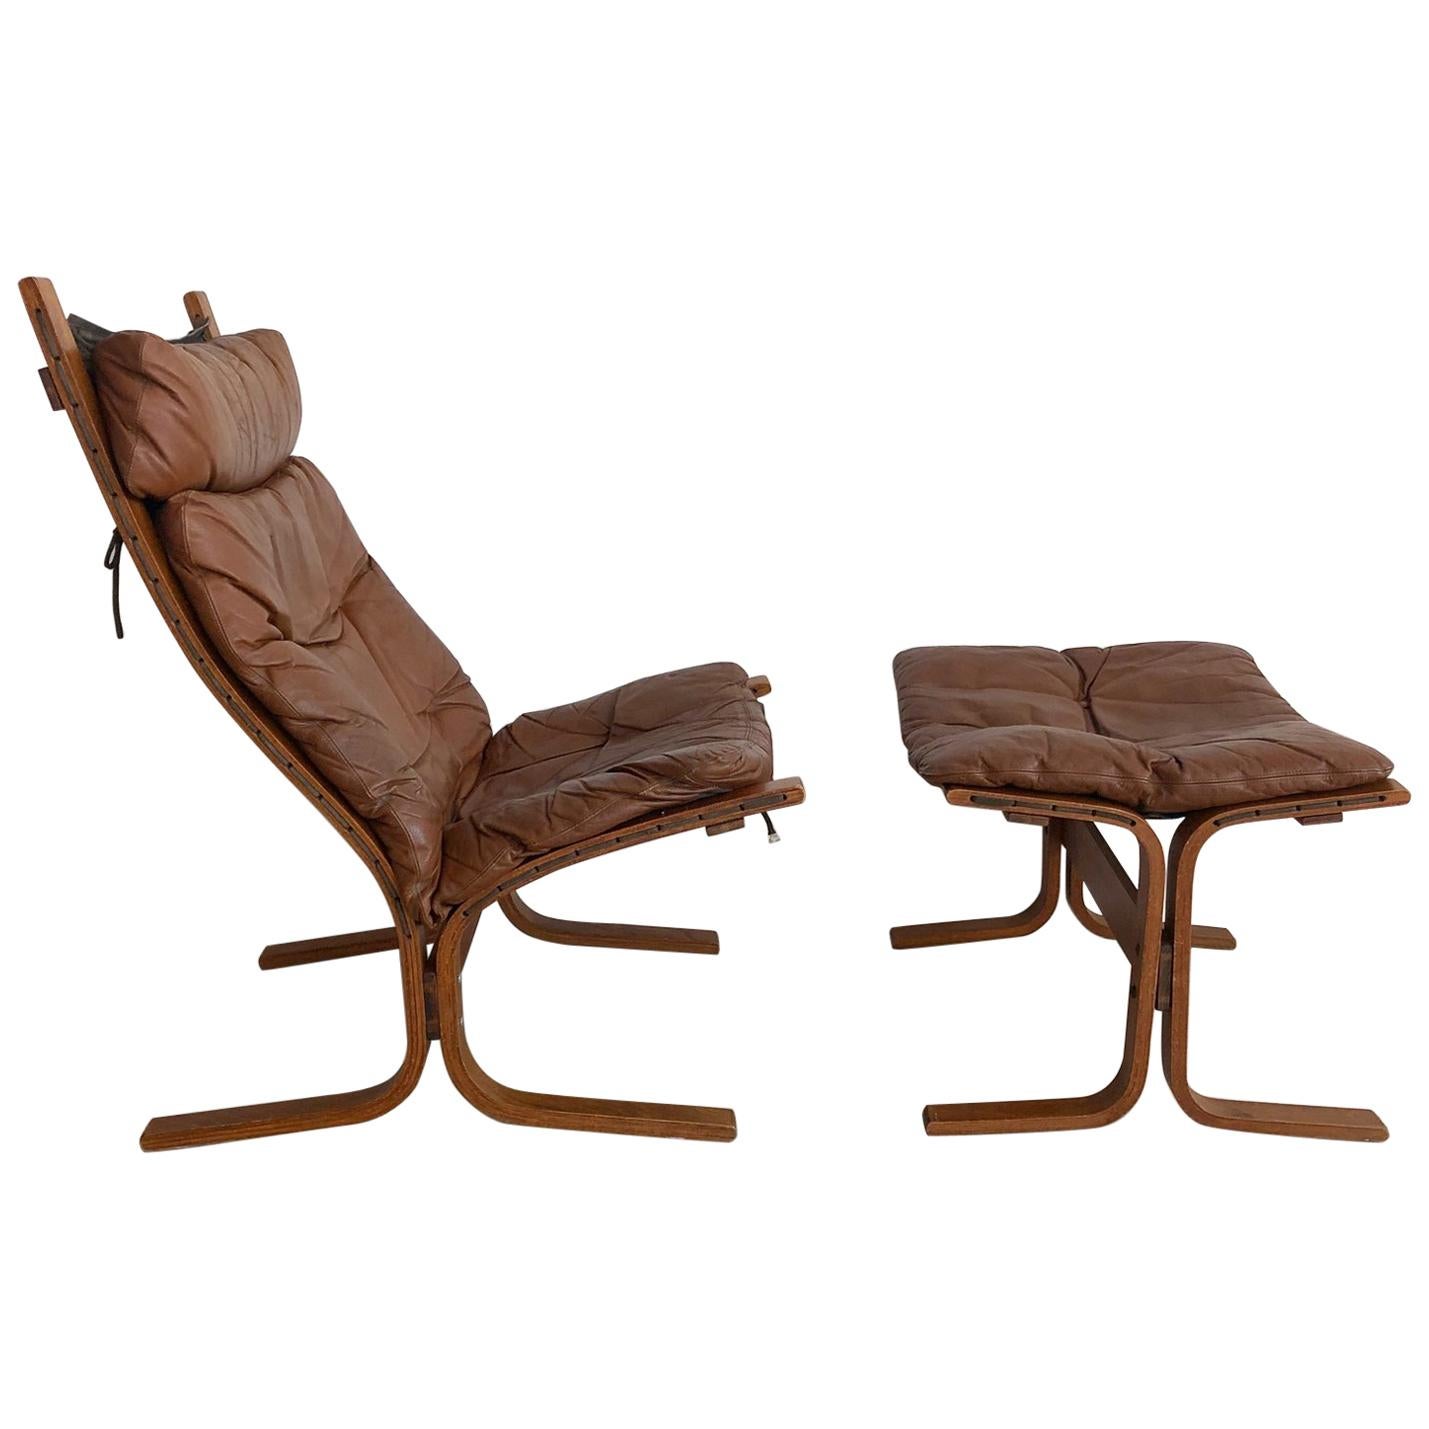 1960s Ingmar Relling for Westnofa "Siesta High" Lounge Chair and Ottoman For Sale